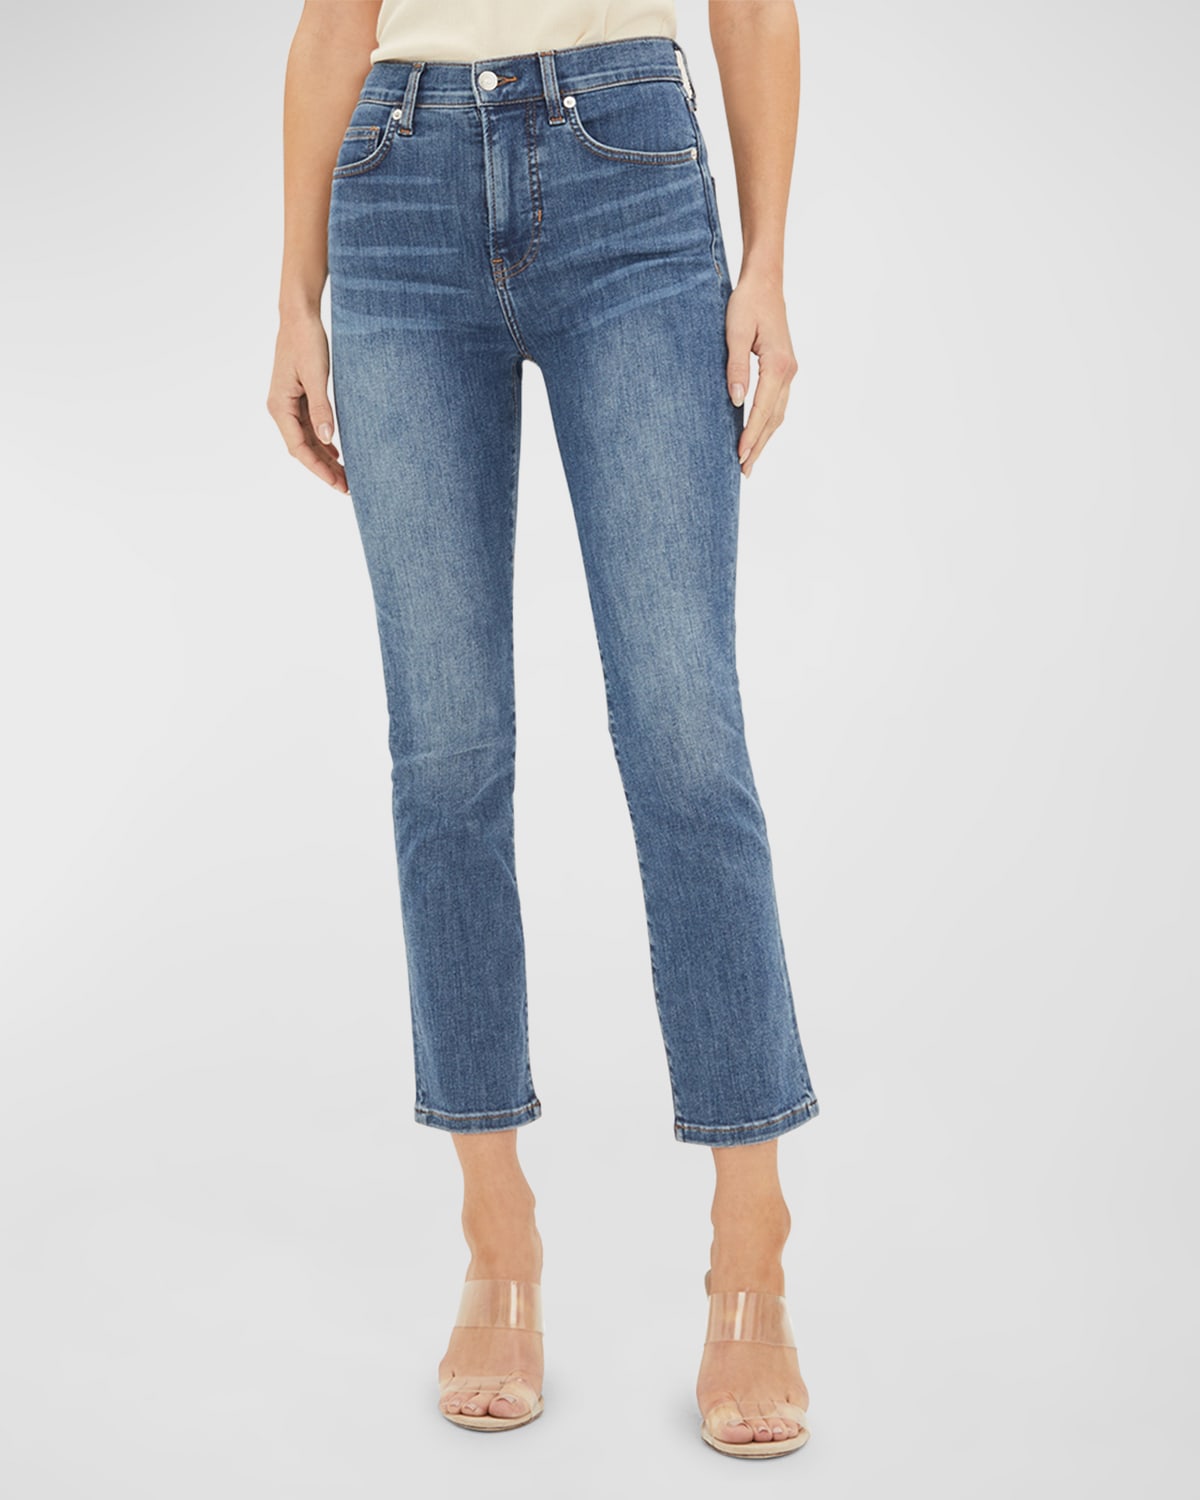 Veronica Beard Jeans Carly Kick Flare Ankle Jeans | Neiman Marcus